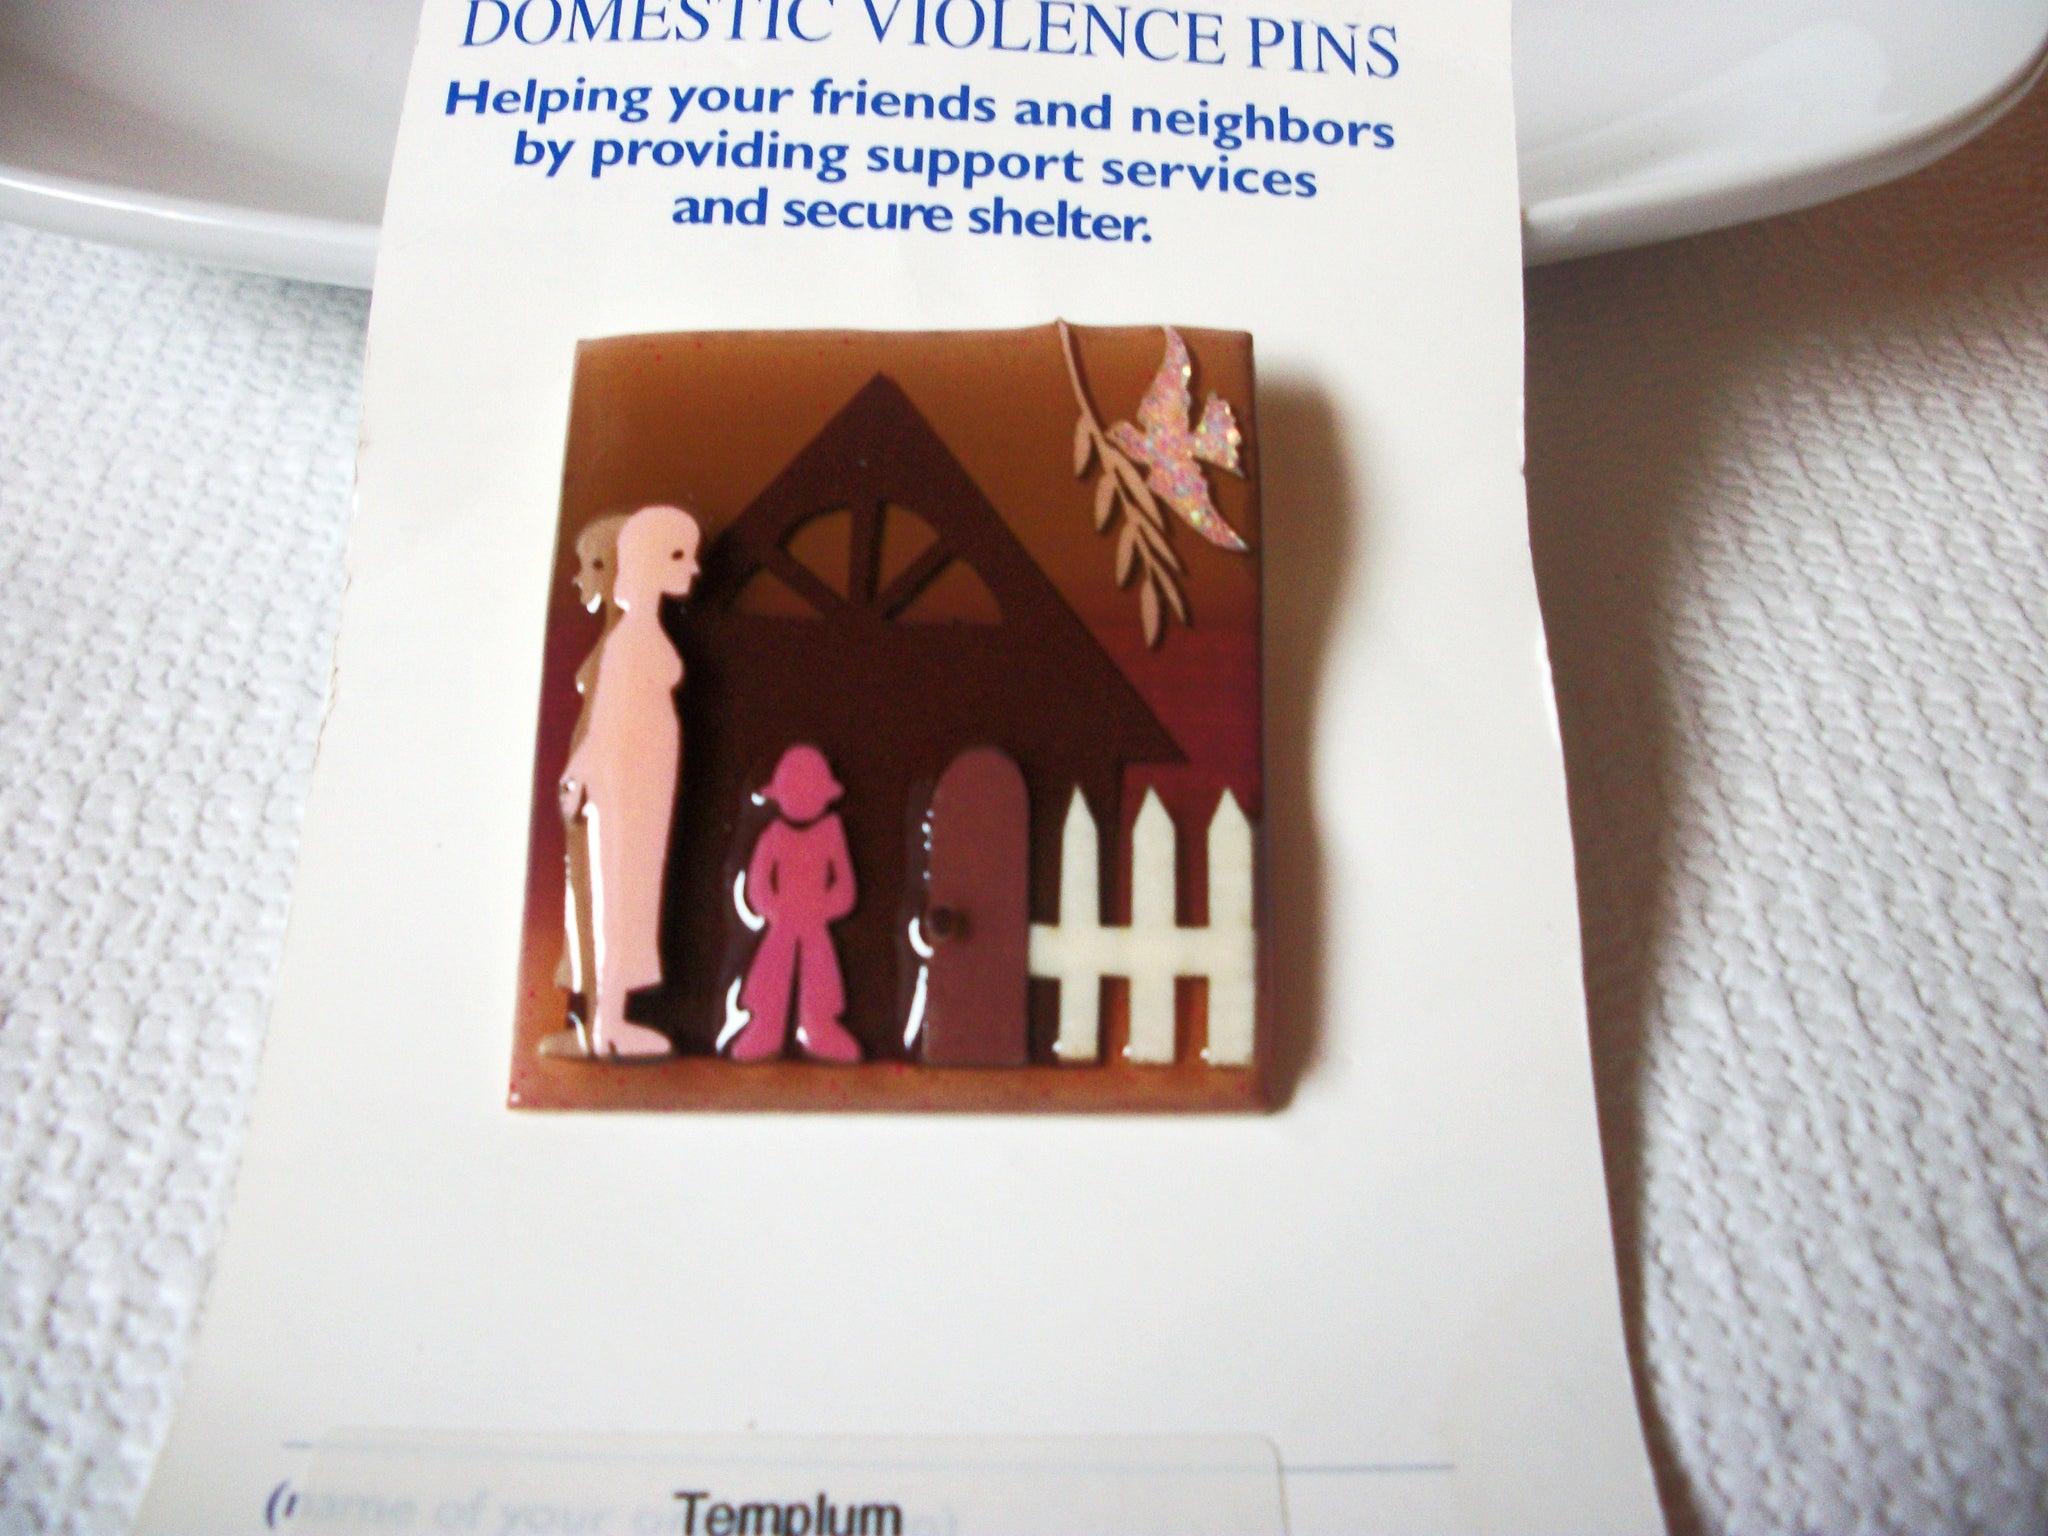 Lucinda House Pins, Domestic Violence Designs By Lucinda 80217